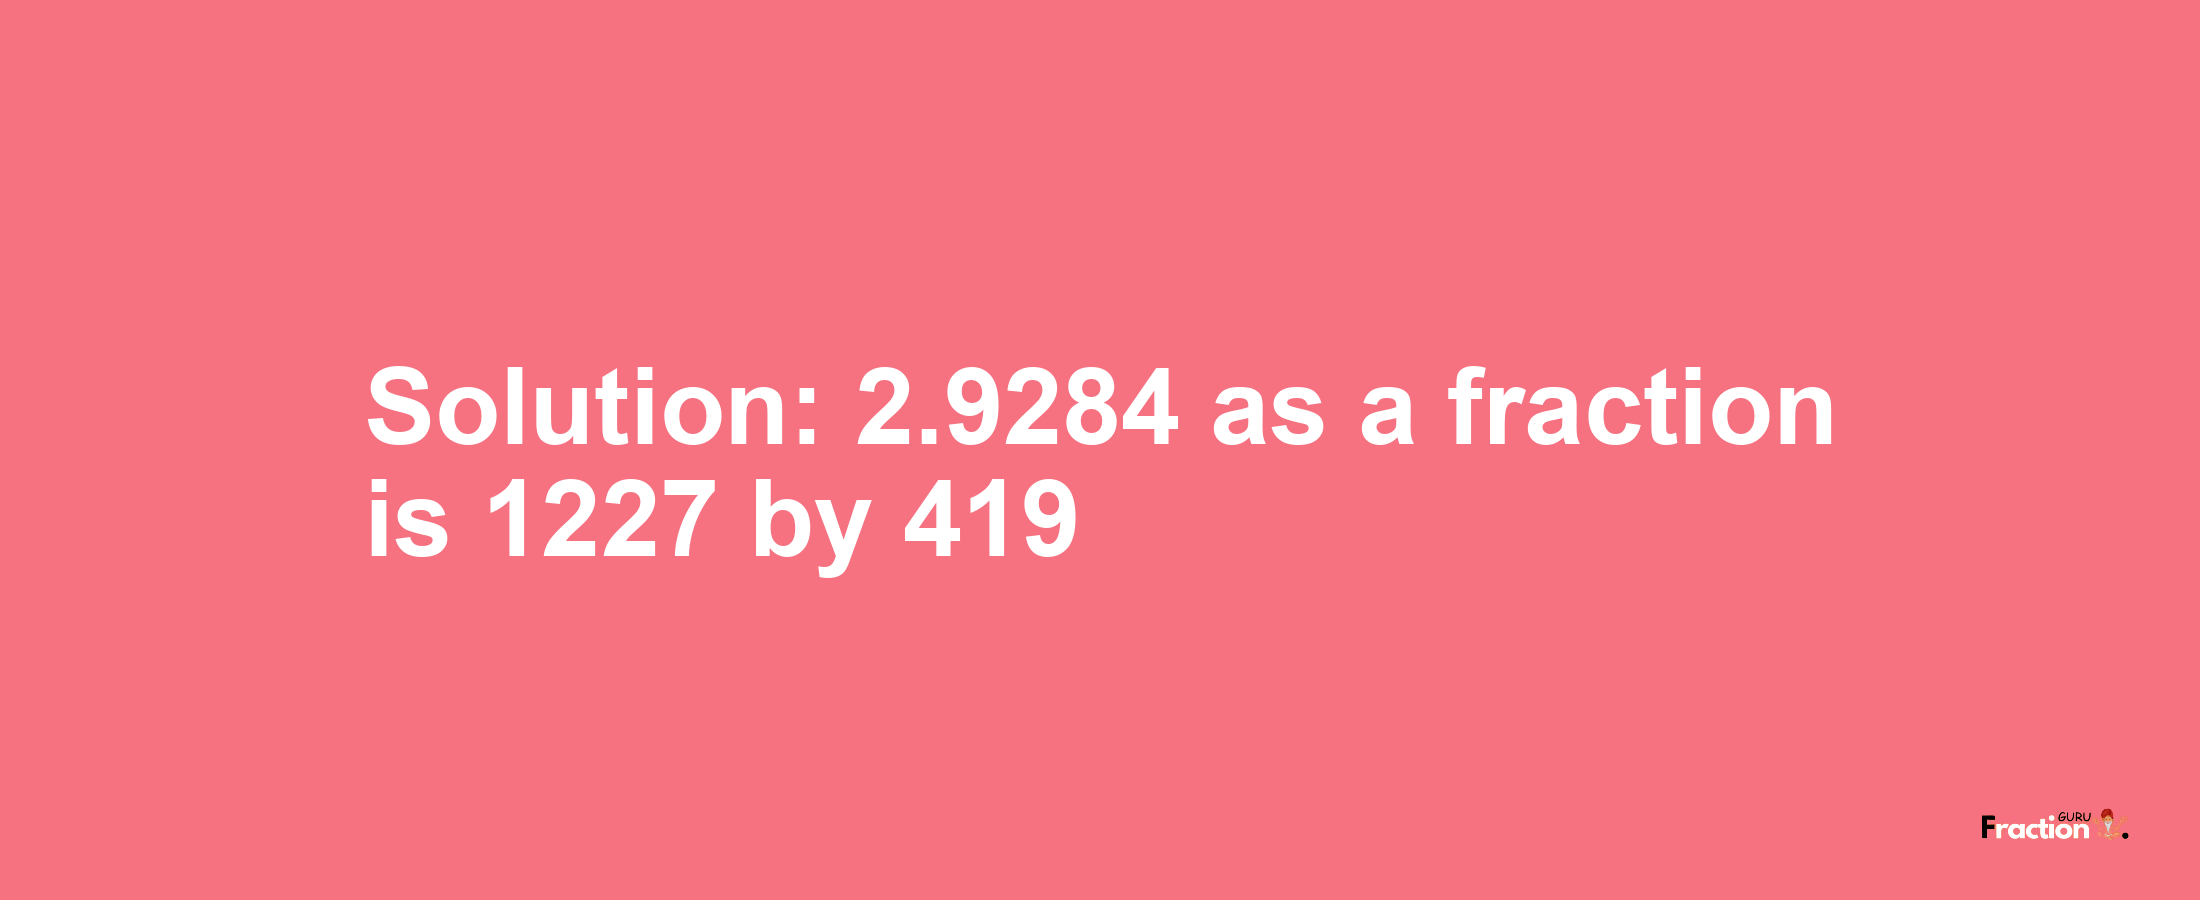 Solution:2.9284 as a fraction is 1227/419